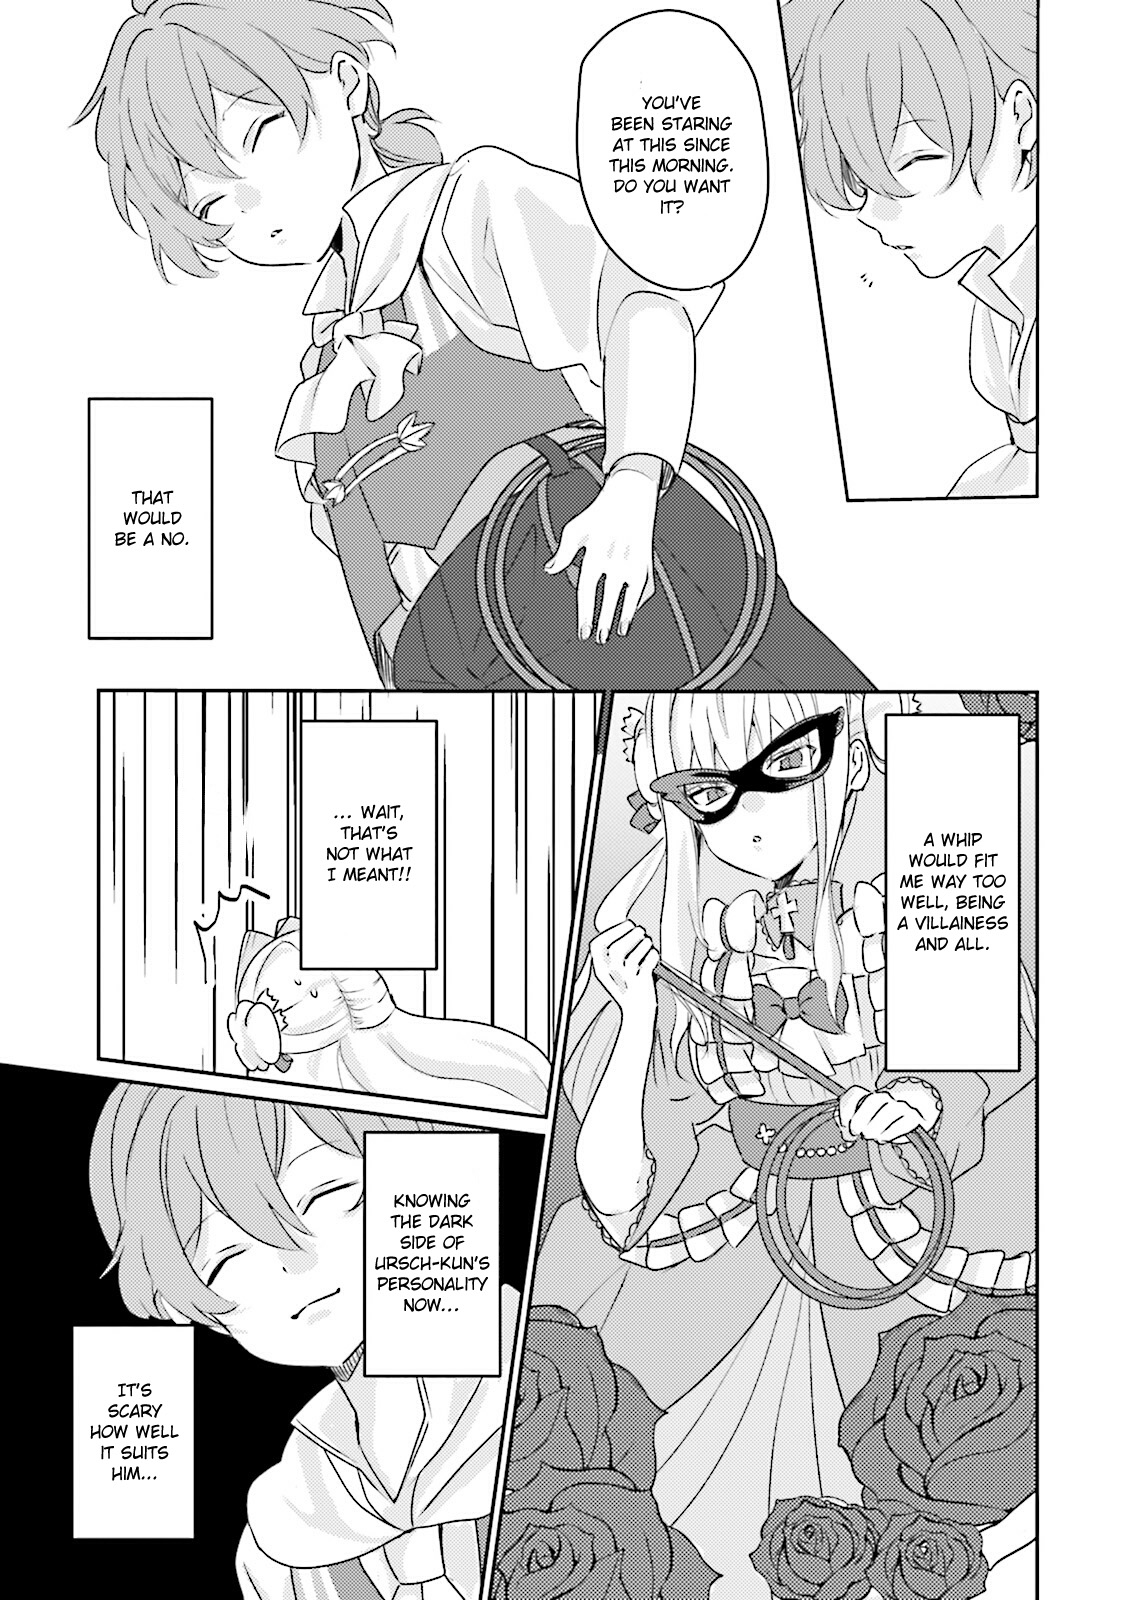 The Villainess Wants to Marry a Commoner!! Vol. 1 Ch. 4